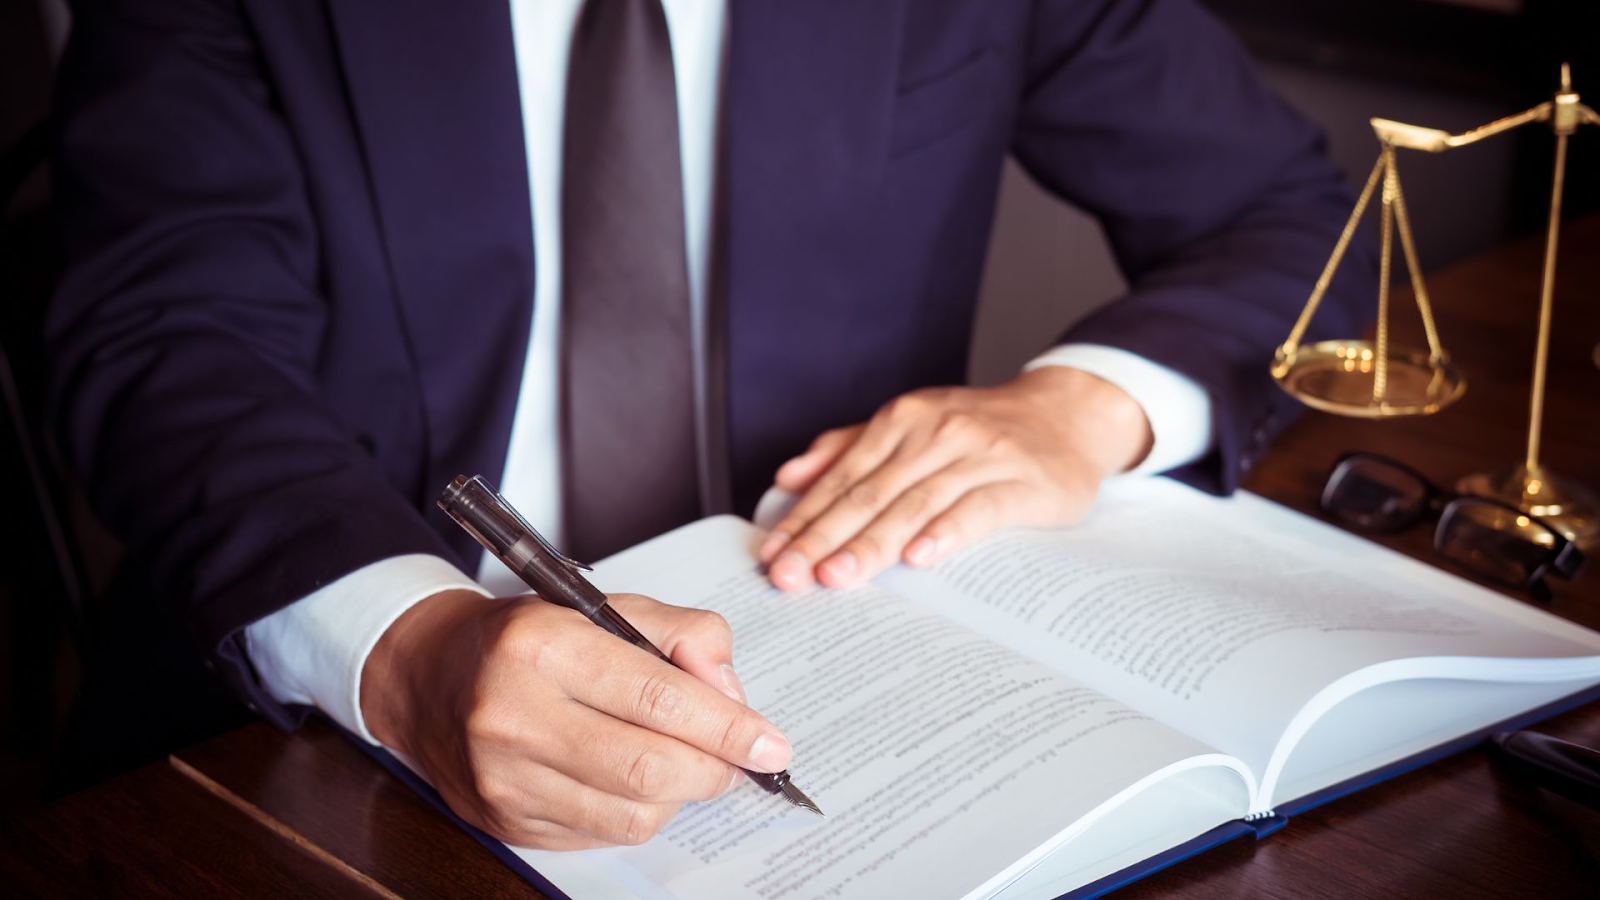 Close-up image of a person's hands, one holding a pen, poised to write in a large open book on a wooden table. The individual appears to be wearing a formal dark suit and a white shirt with cufflinks. In the background, a scale of justice is in focus, symbolizing legal practice. The presence of glasses next to the book suggests a studious or professional setting, possibly in a law office.